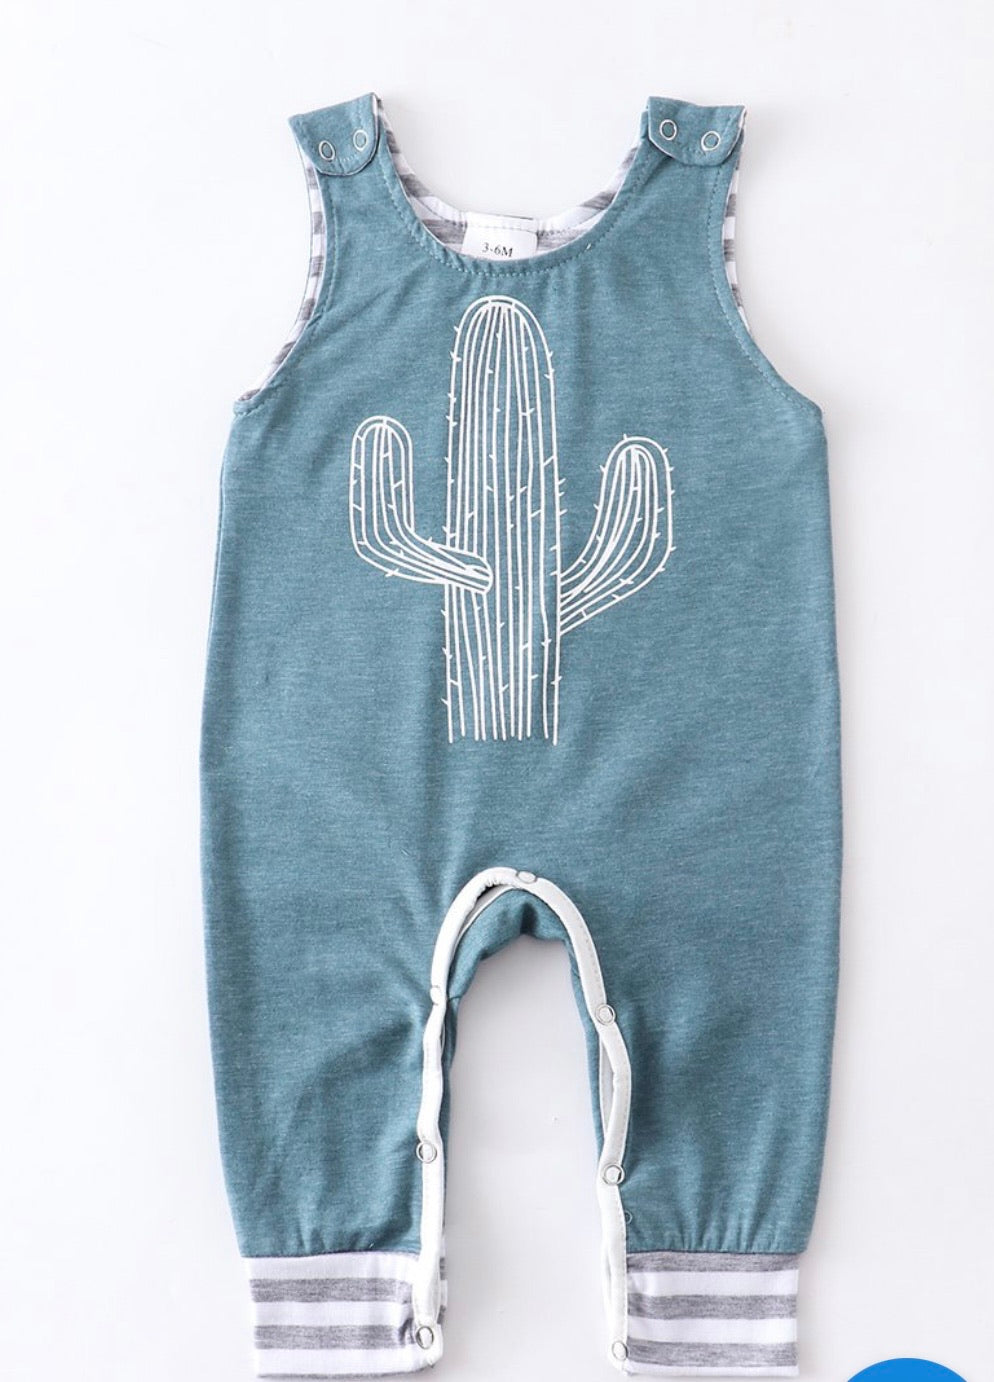 NEW ARRIVALS! Cactus Baby Overall Romper